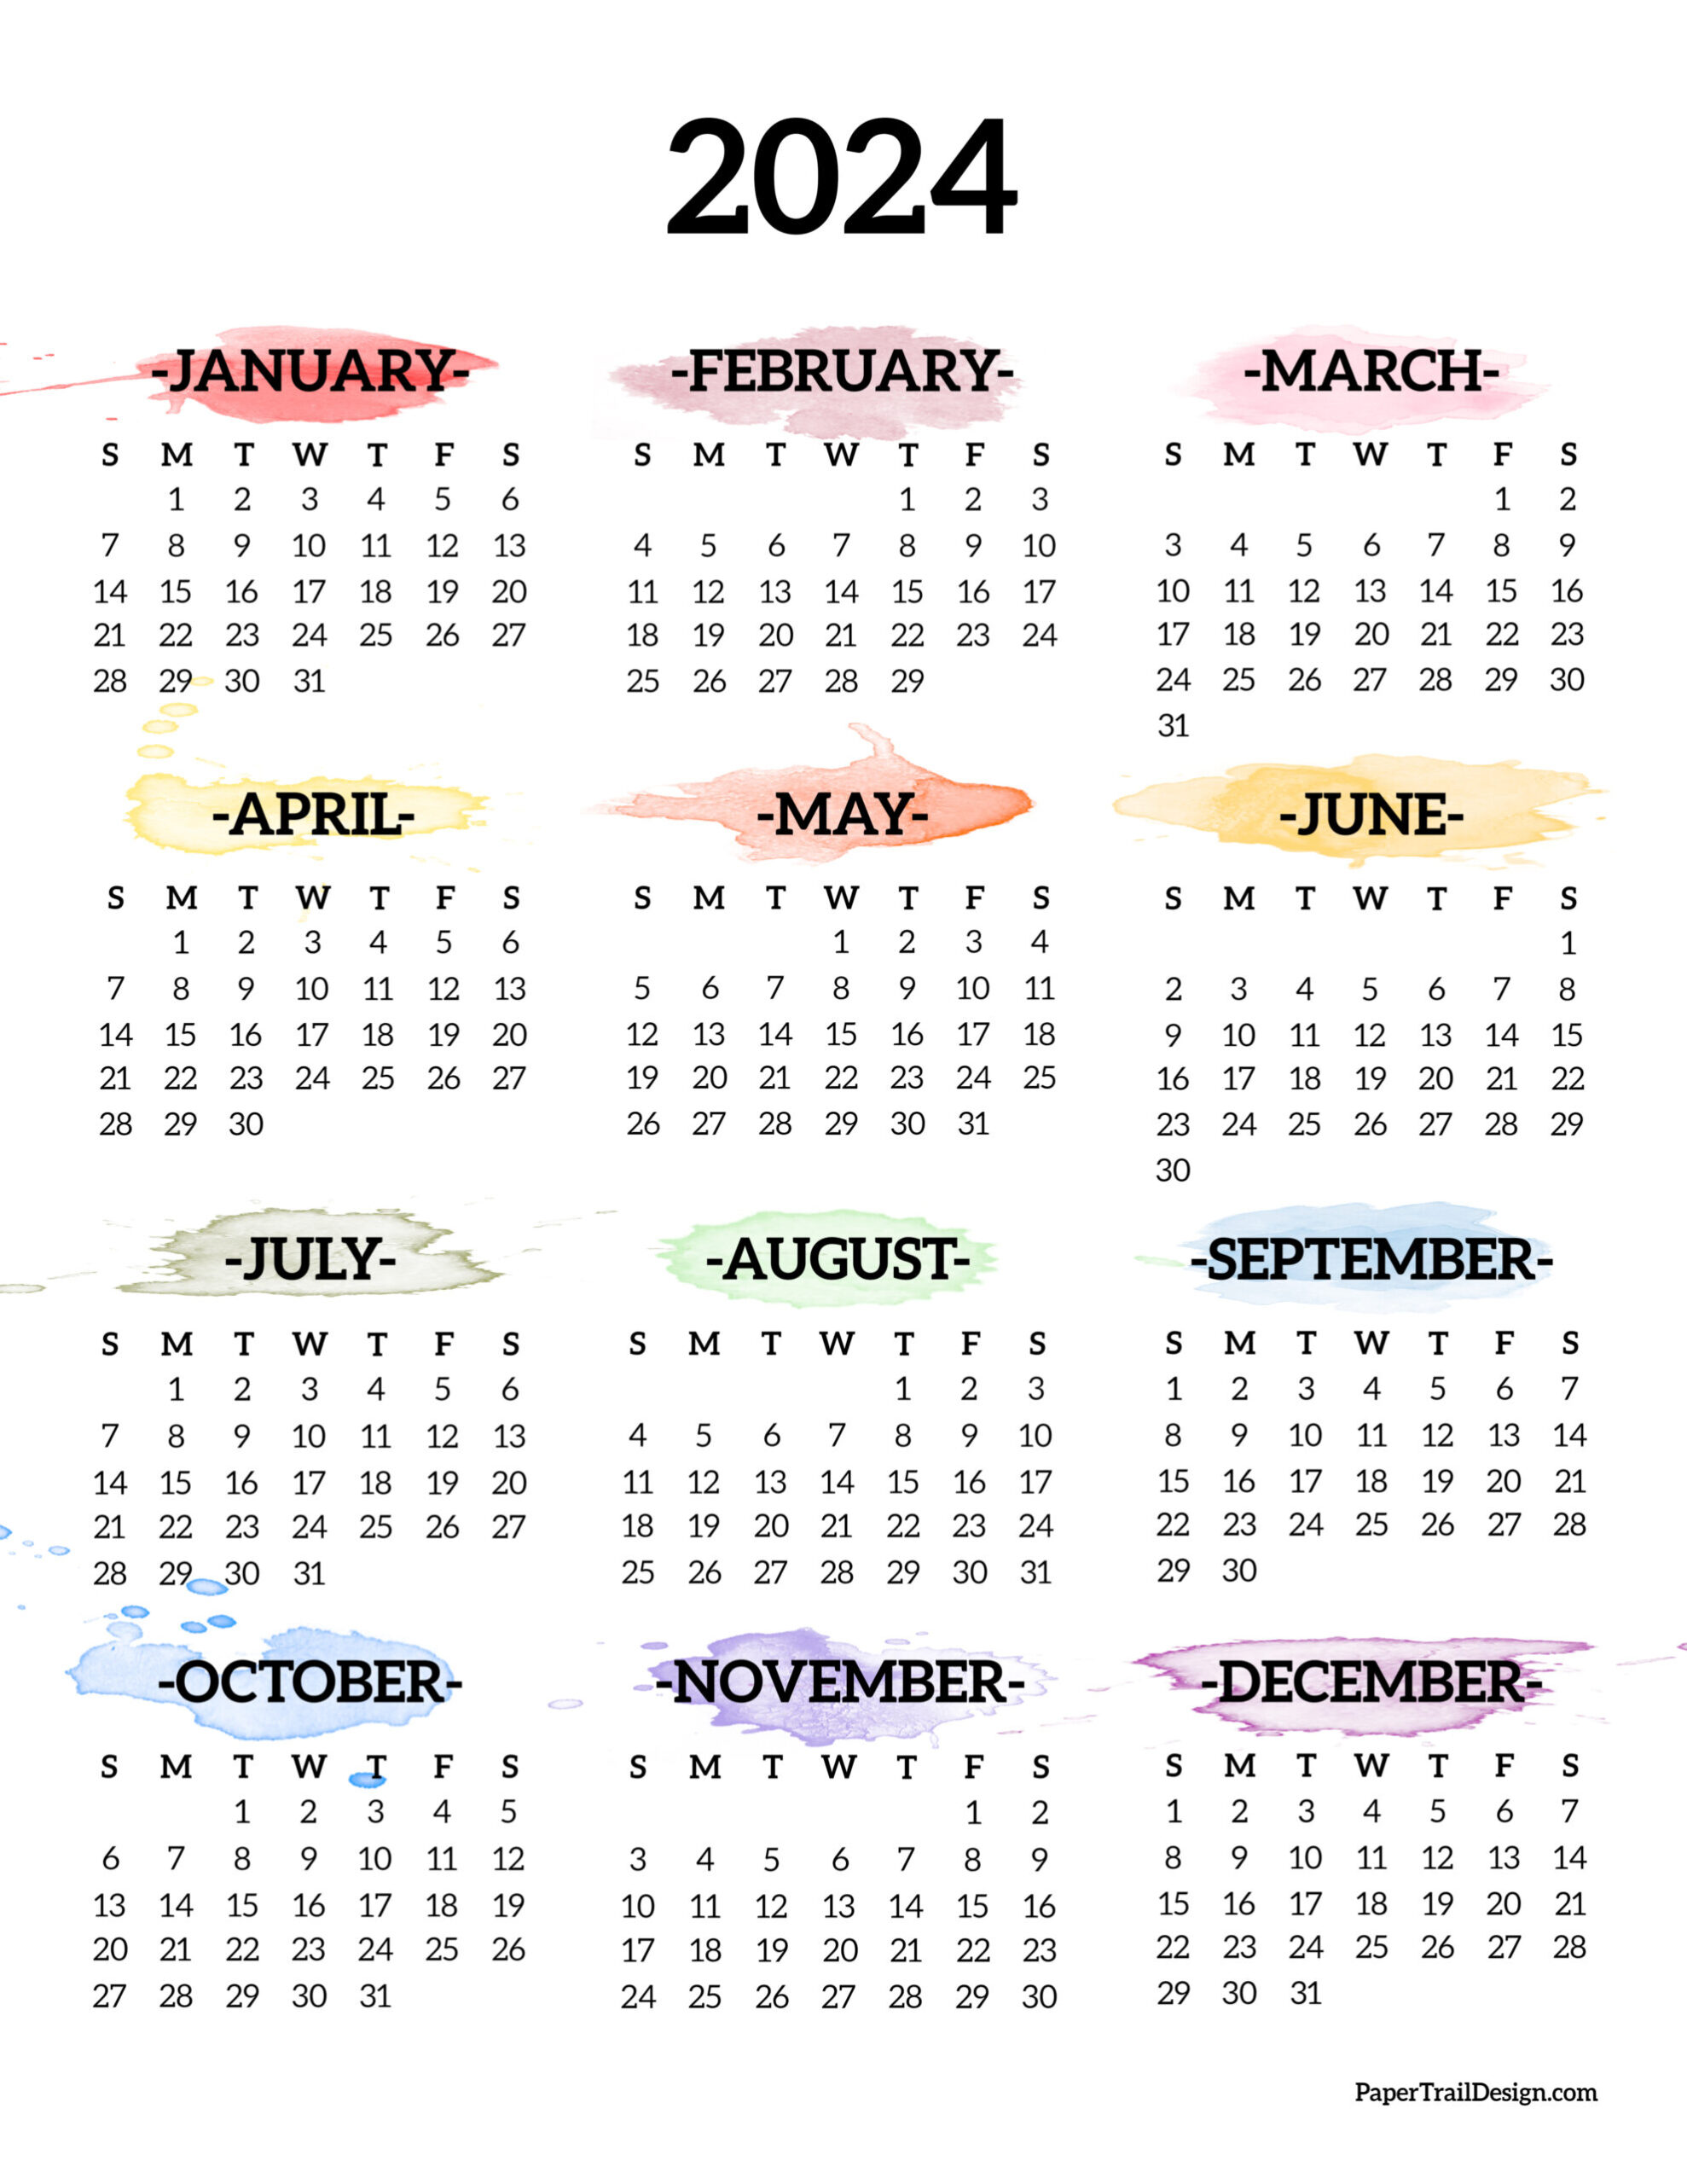 Calendar 2024 Printable One Page - Paper Trail Design for Printable 2024 Yearly Calendar One Page